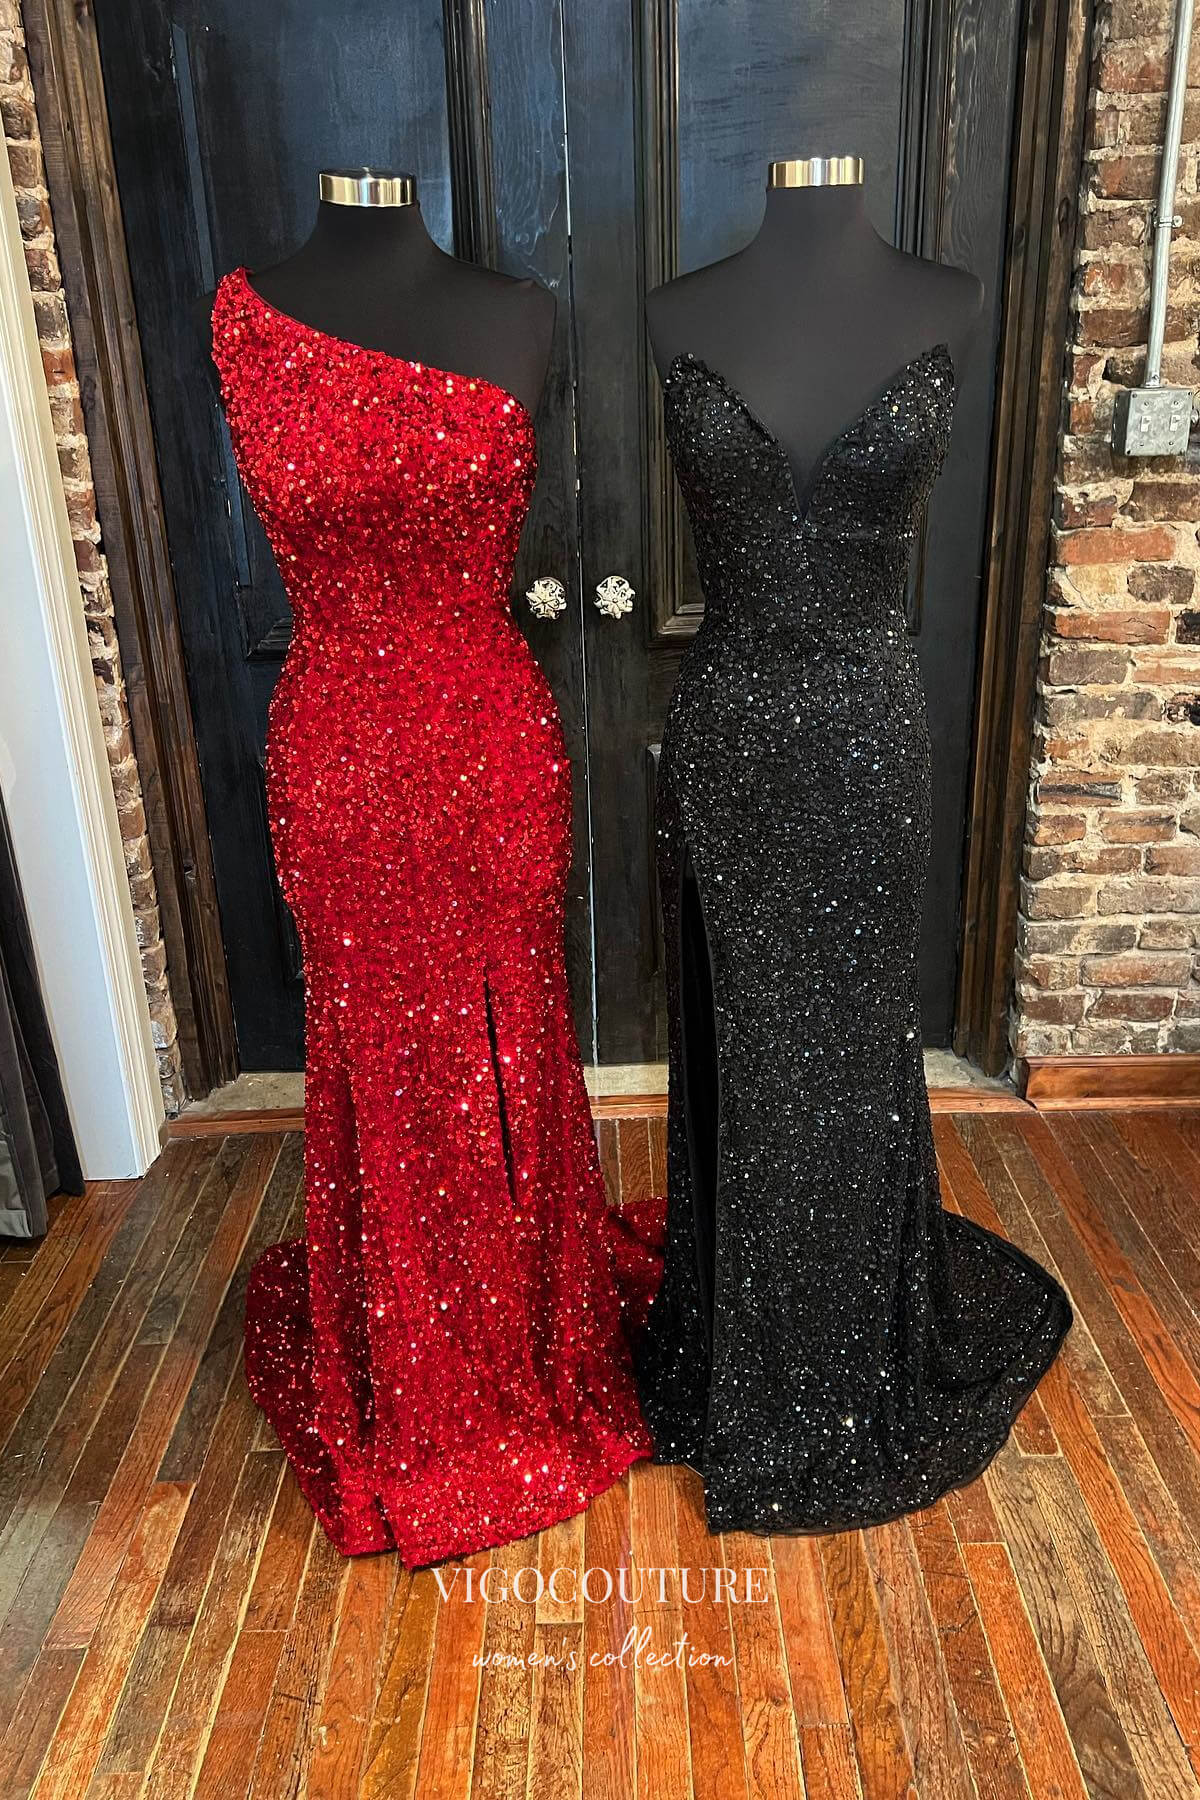 vigocouture-Sequin Mermaid Prom Dresses Sweetheart Neck Formal Dresses 21591-Prom Dresses-vigocouture-One Shoulder-As Pictured-US2